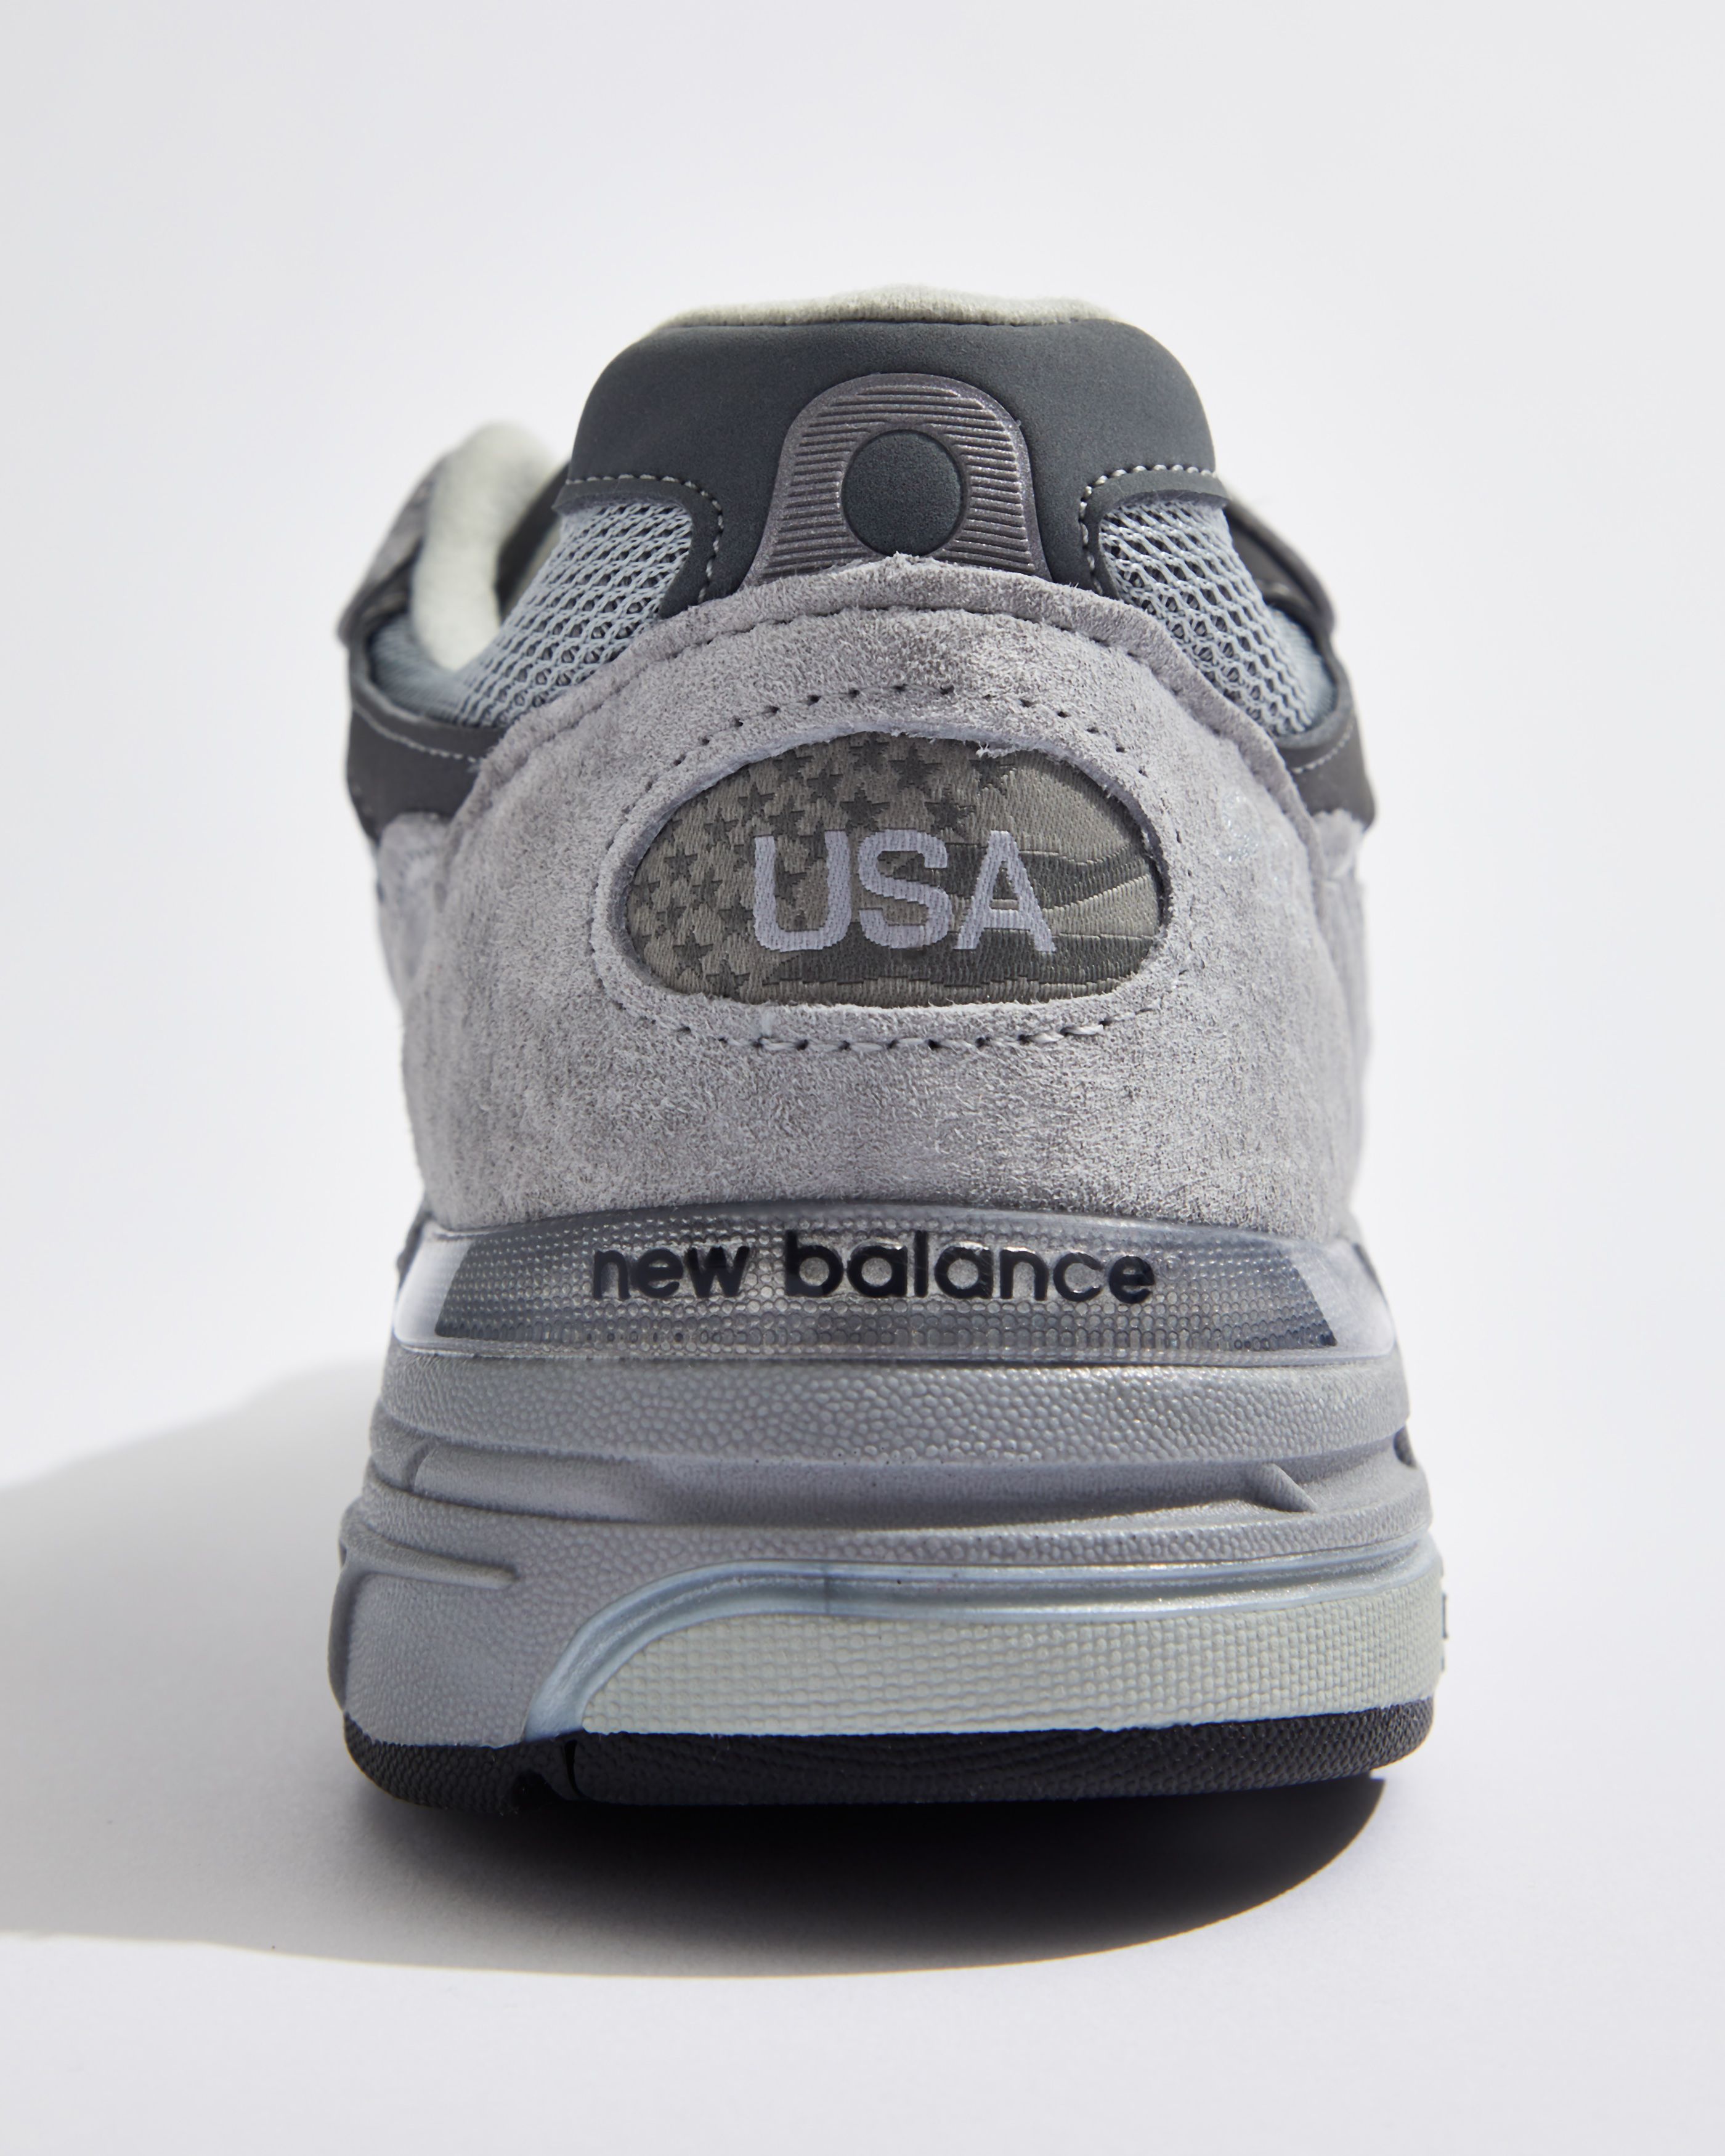 New Balance 993 Made in US Sneaker Review, Price and Where to Buy